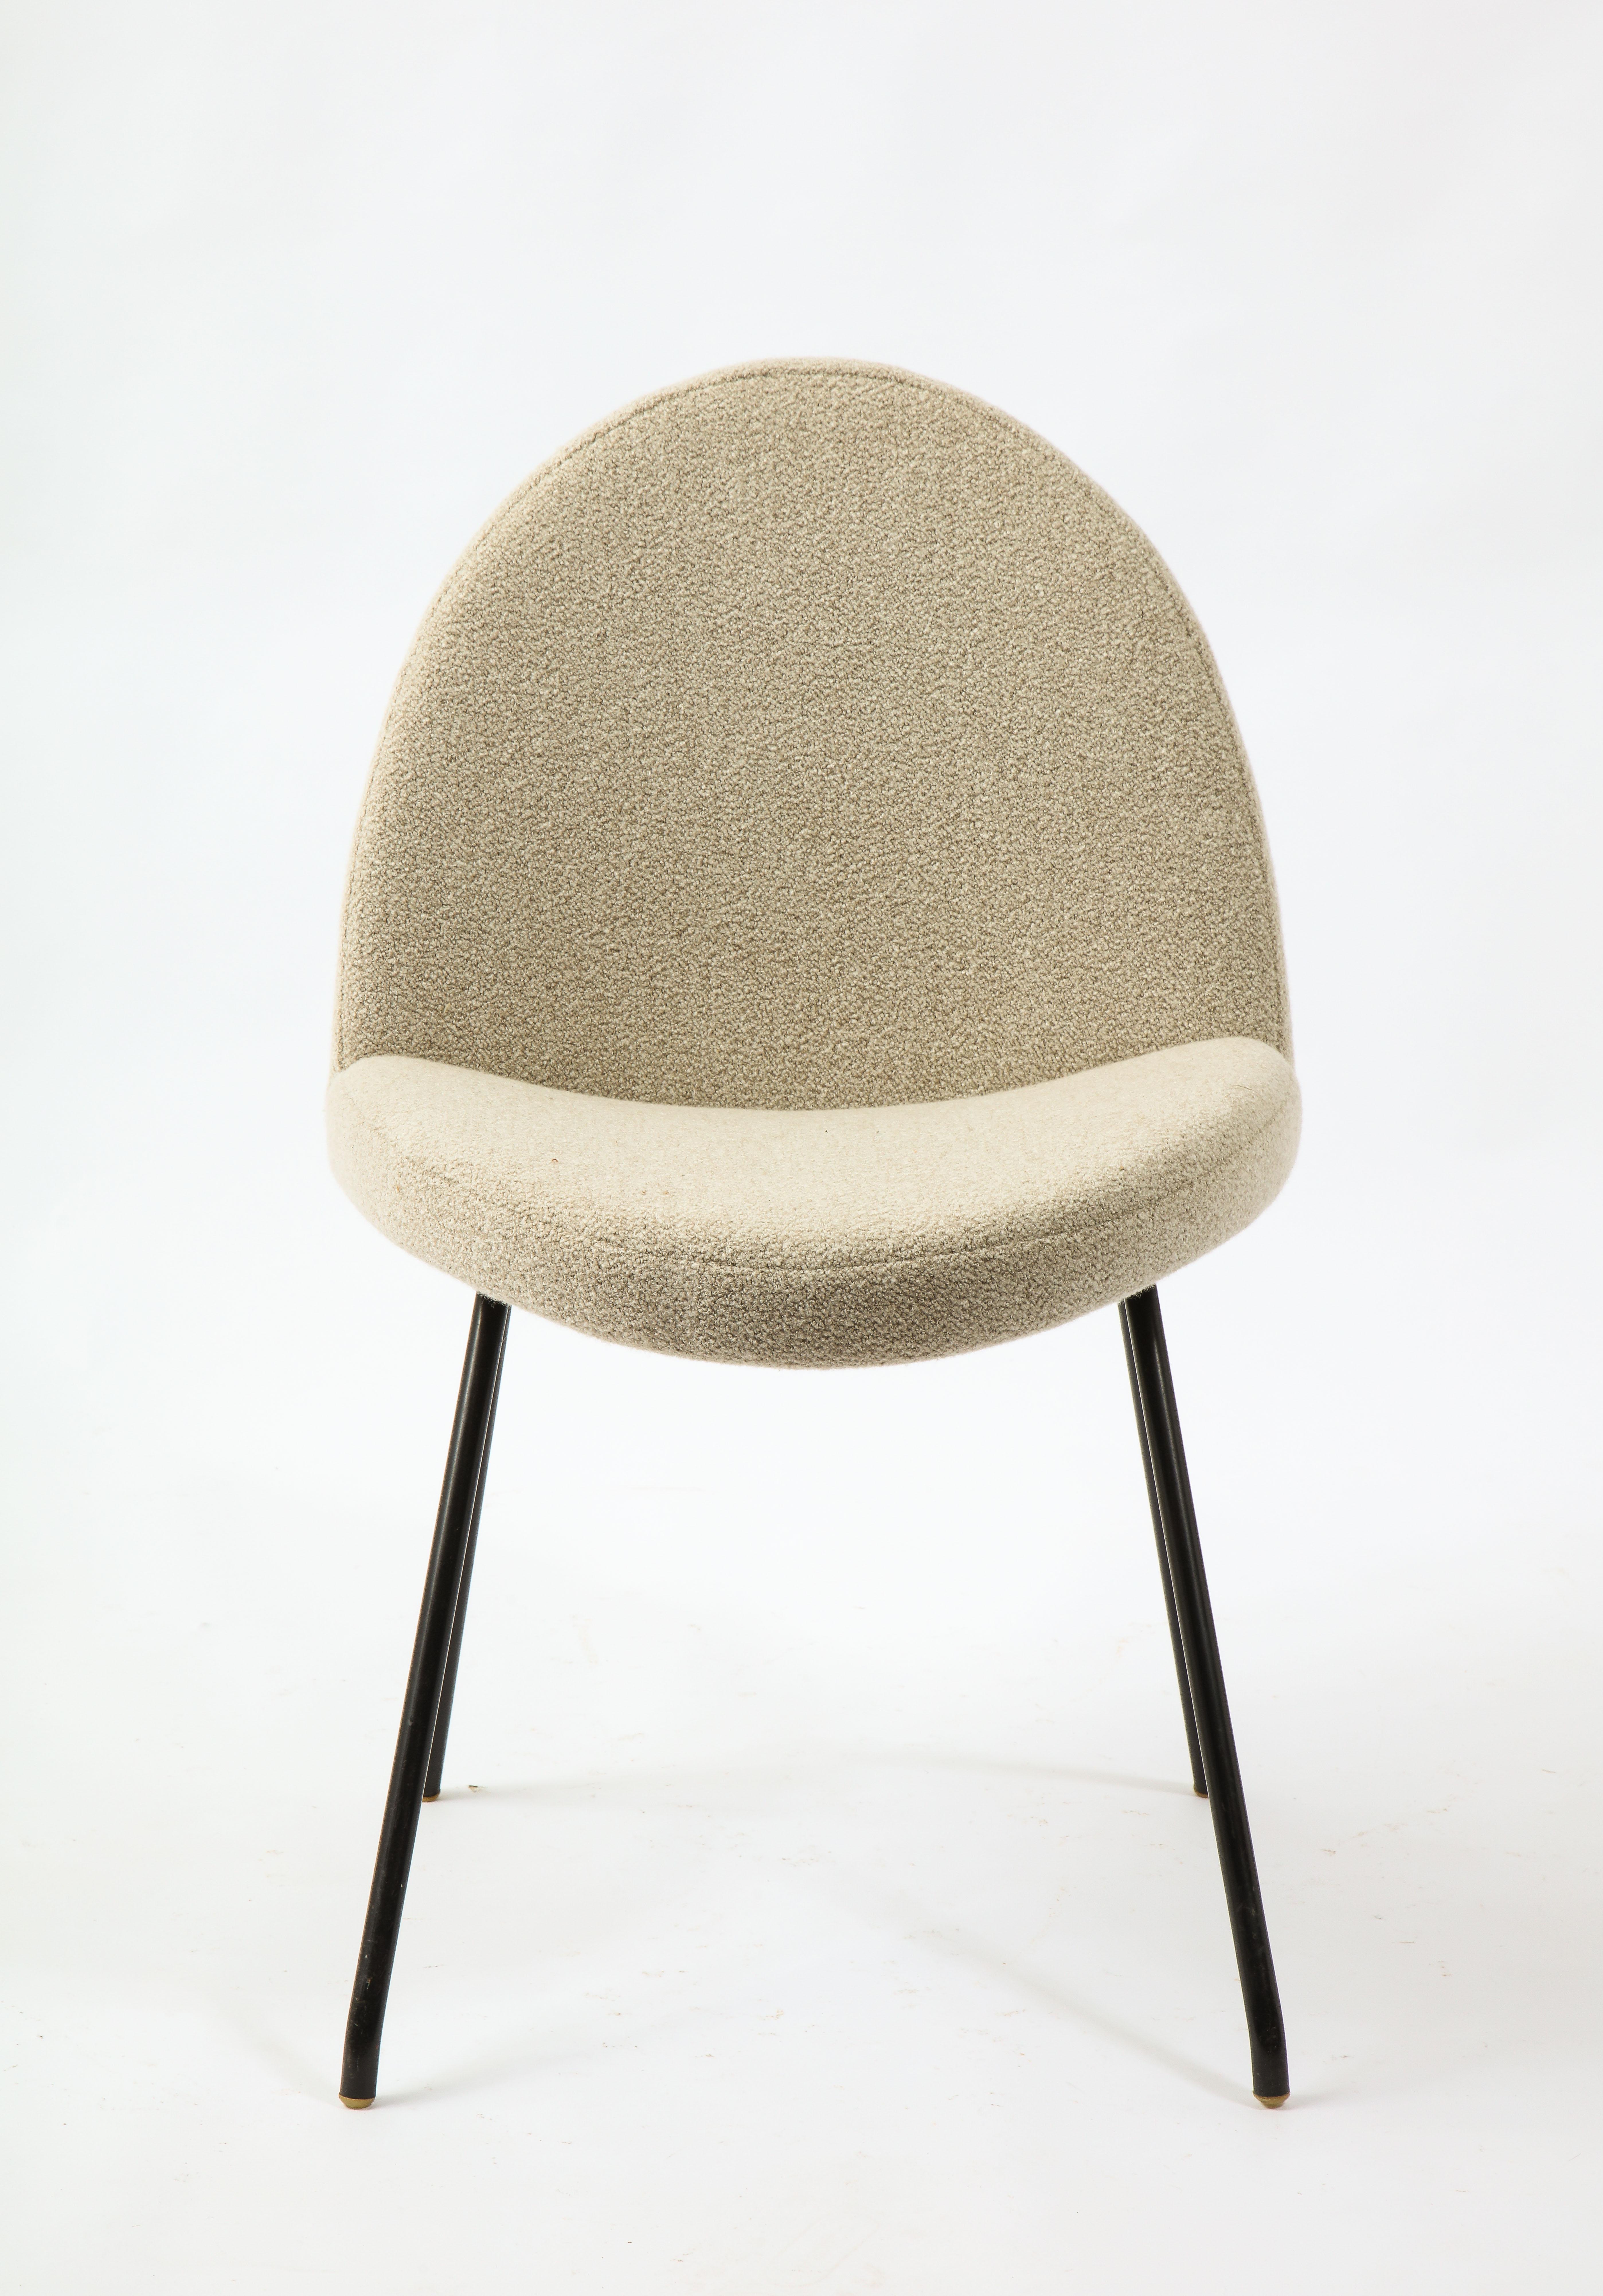 Twelve chairs model 771 by Joseph Andre Motte for Steiner, upholstery over maple on black enameled steel base. Only one chair finished in bouclé for display. Set is COM.